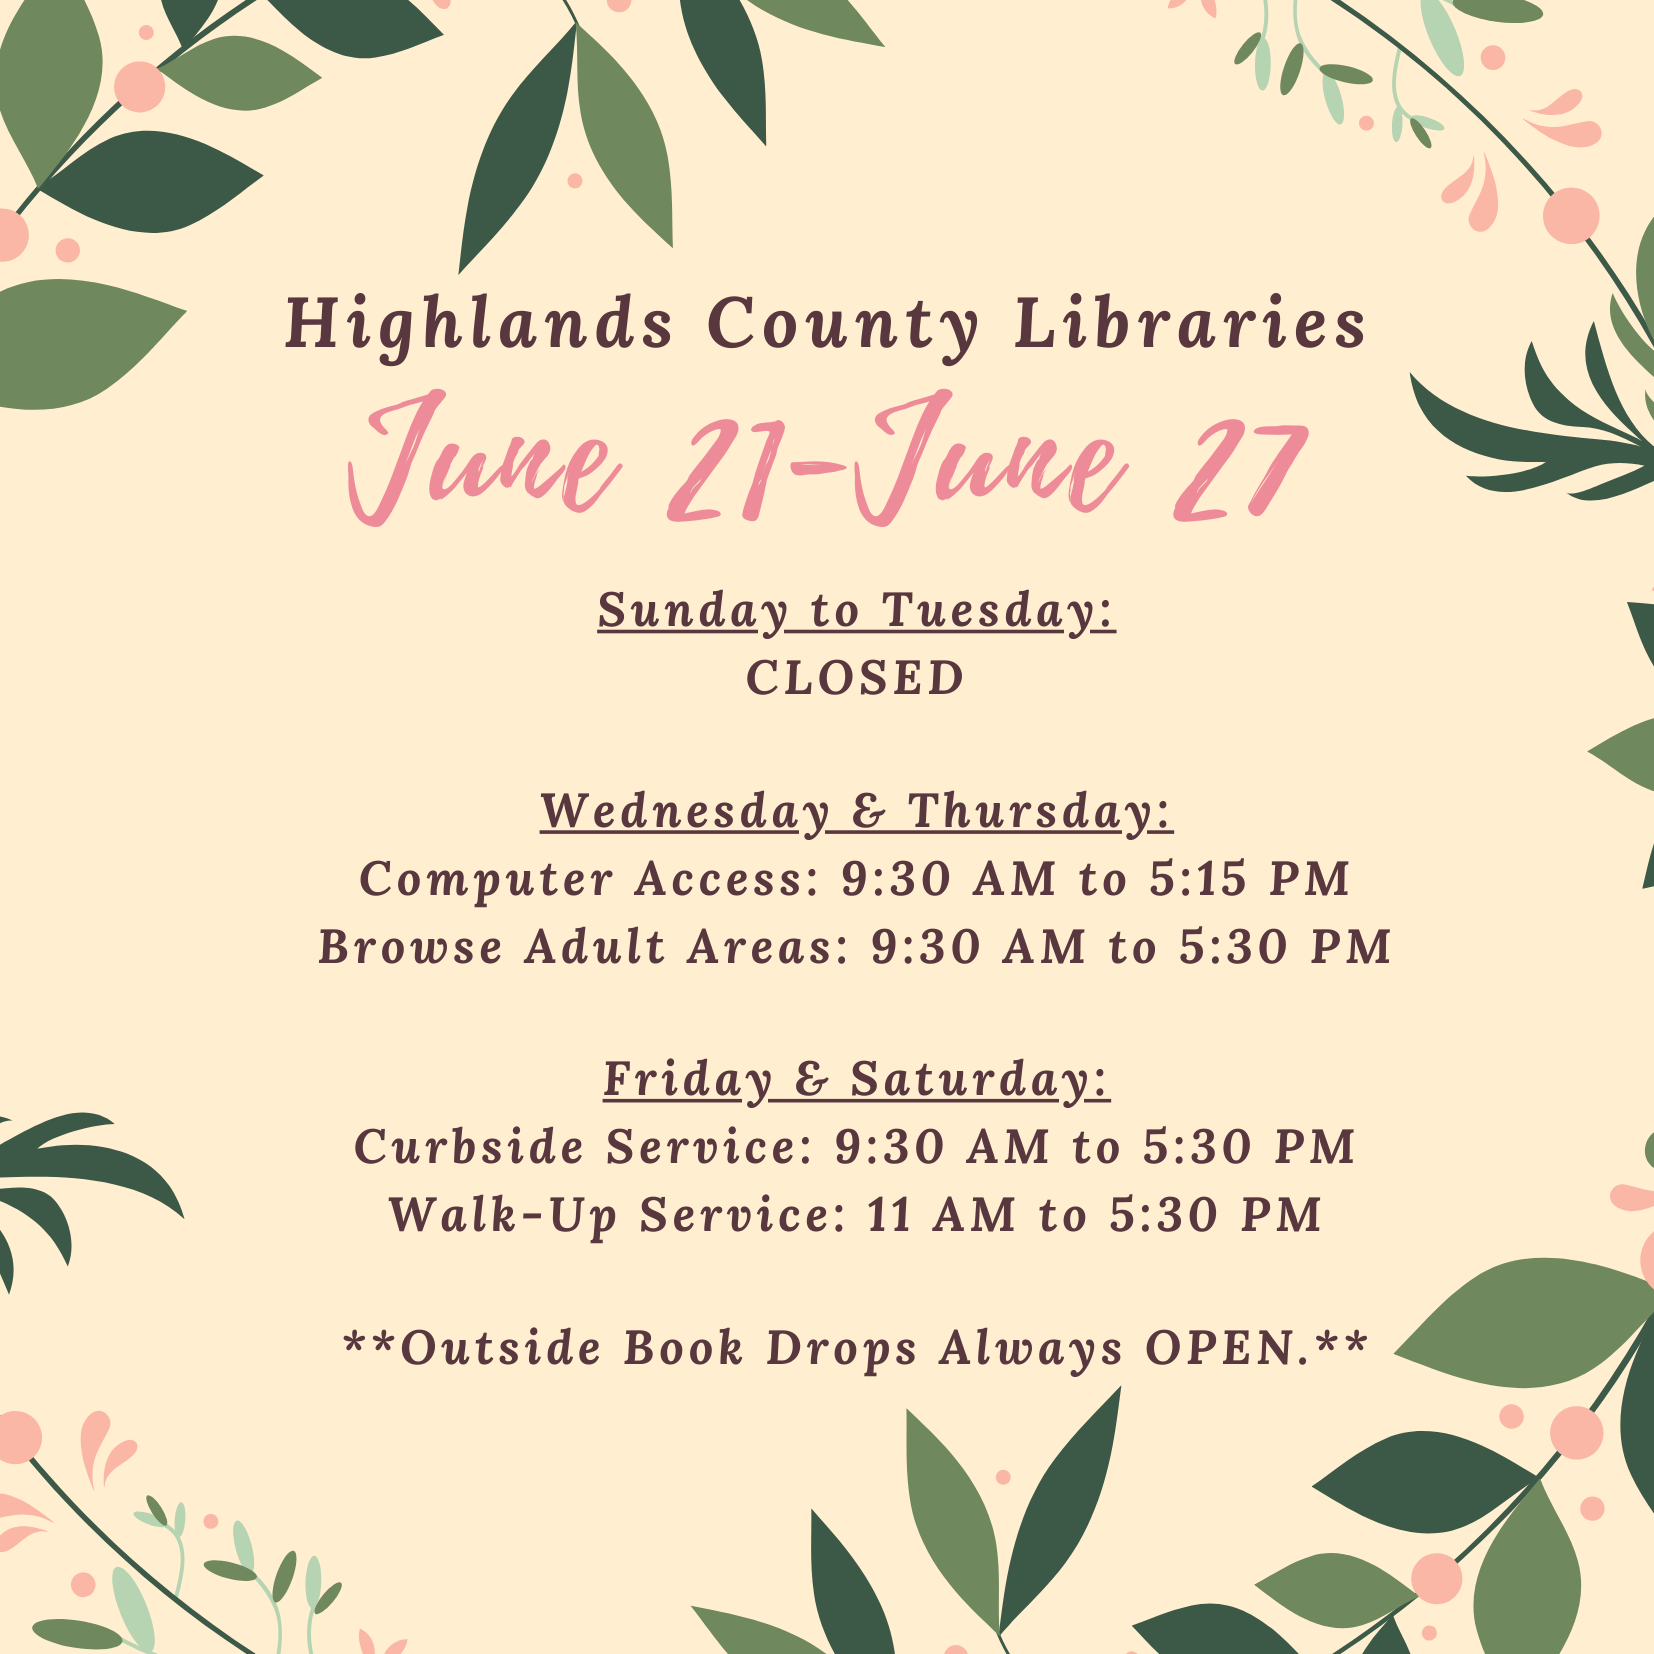 Highlands County Public Libraries Schedule for June 21 to June 27, 2020:  Wednesday & Thursday: Computer access & adult areas open for browsing. Friday & Saturday: Curbside and Walk-Up Services available.